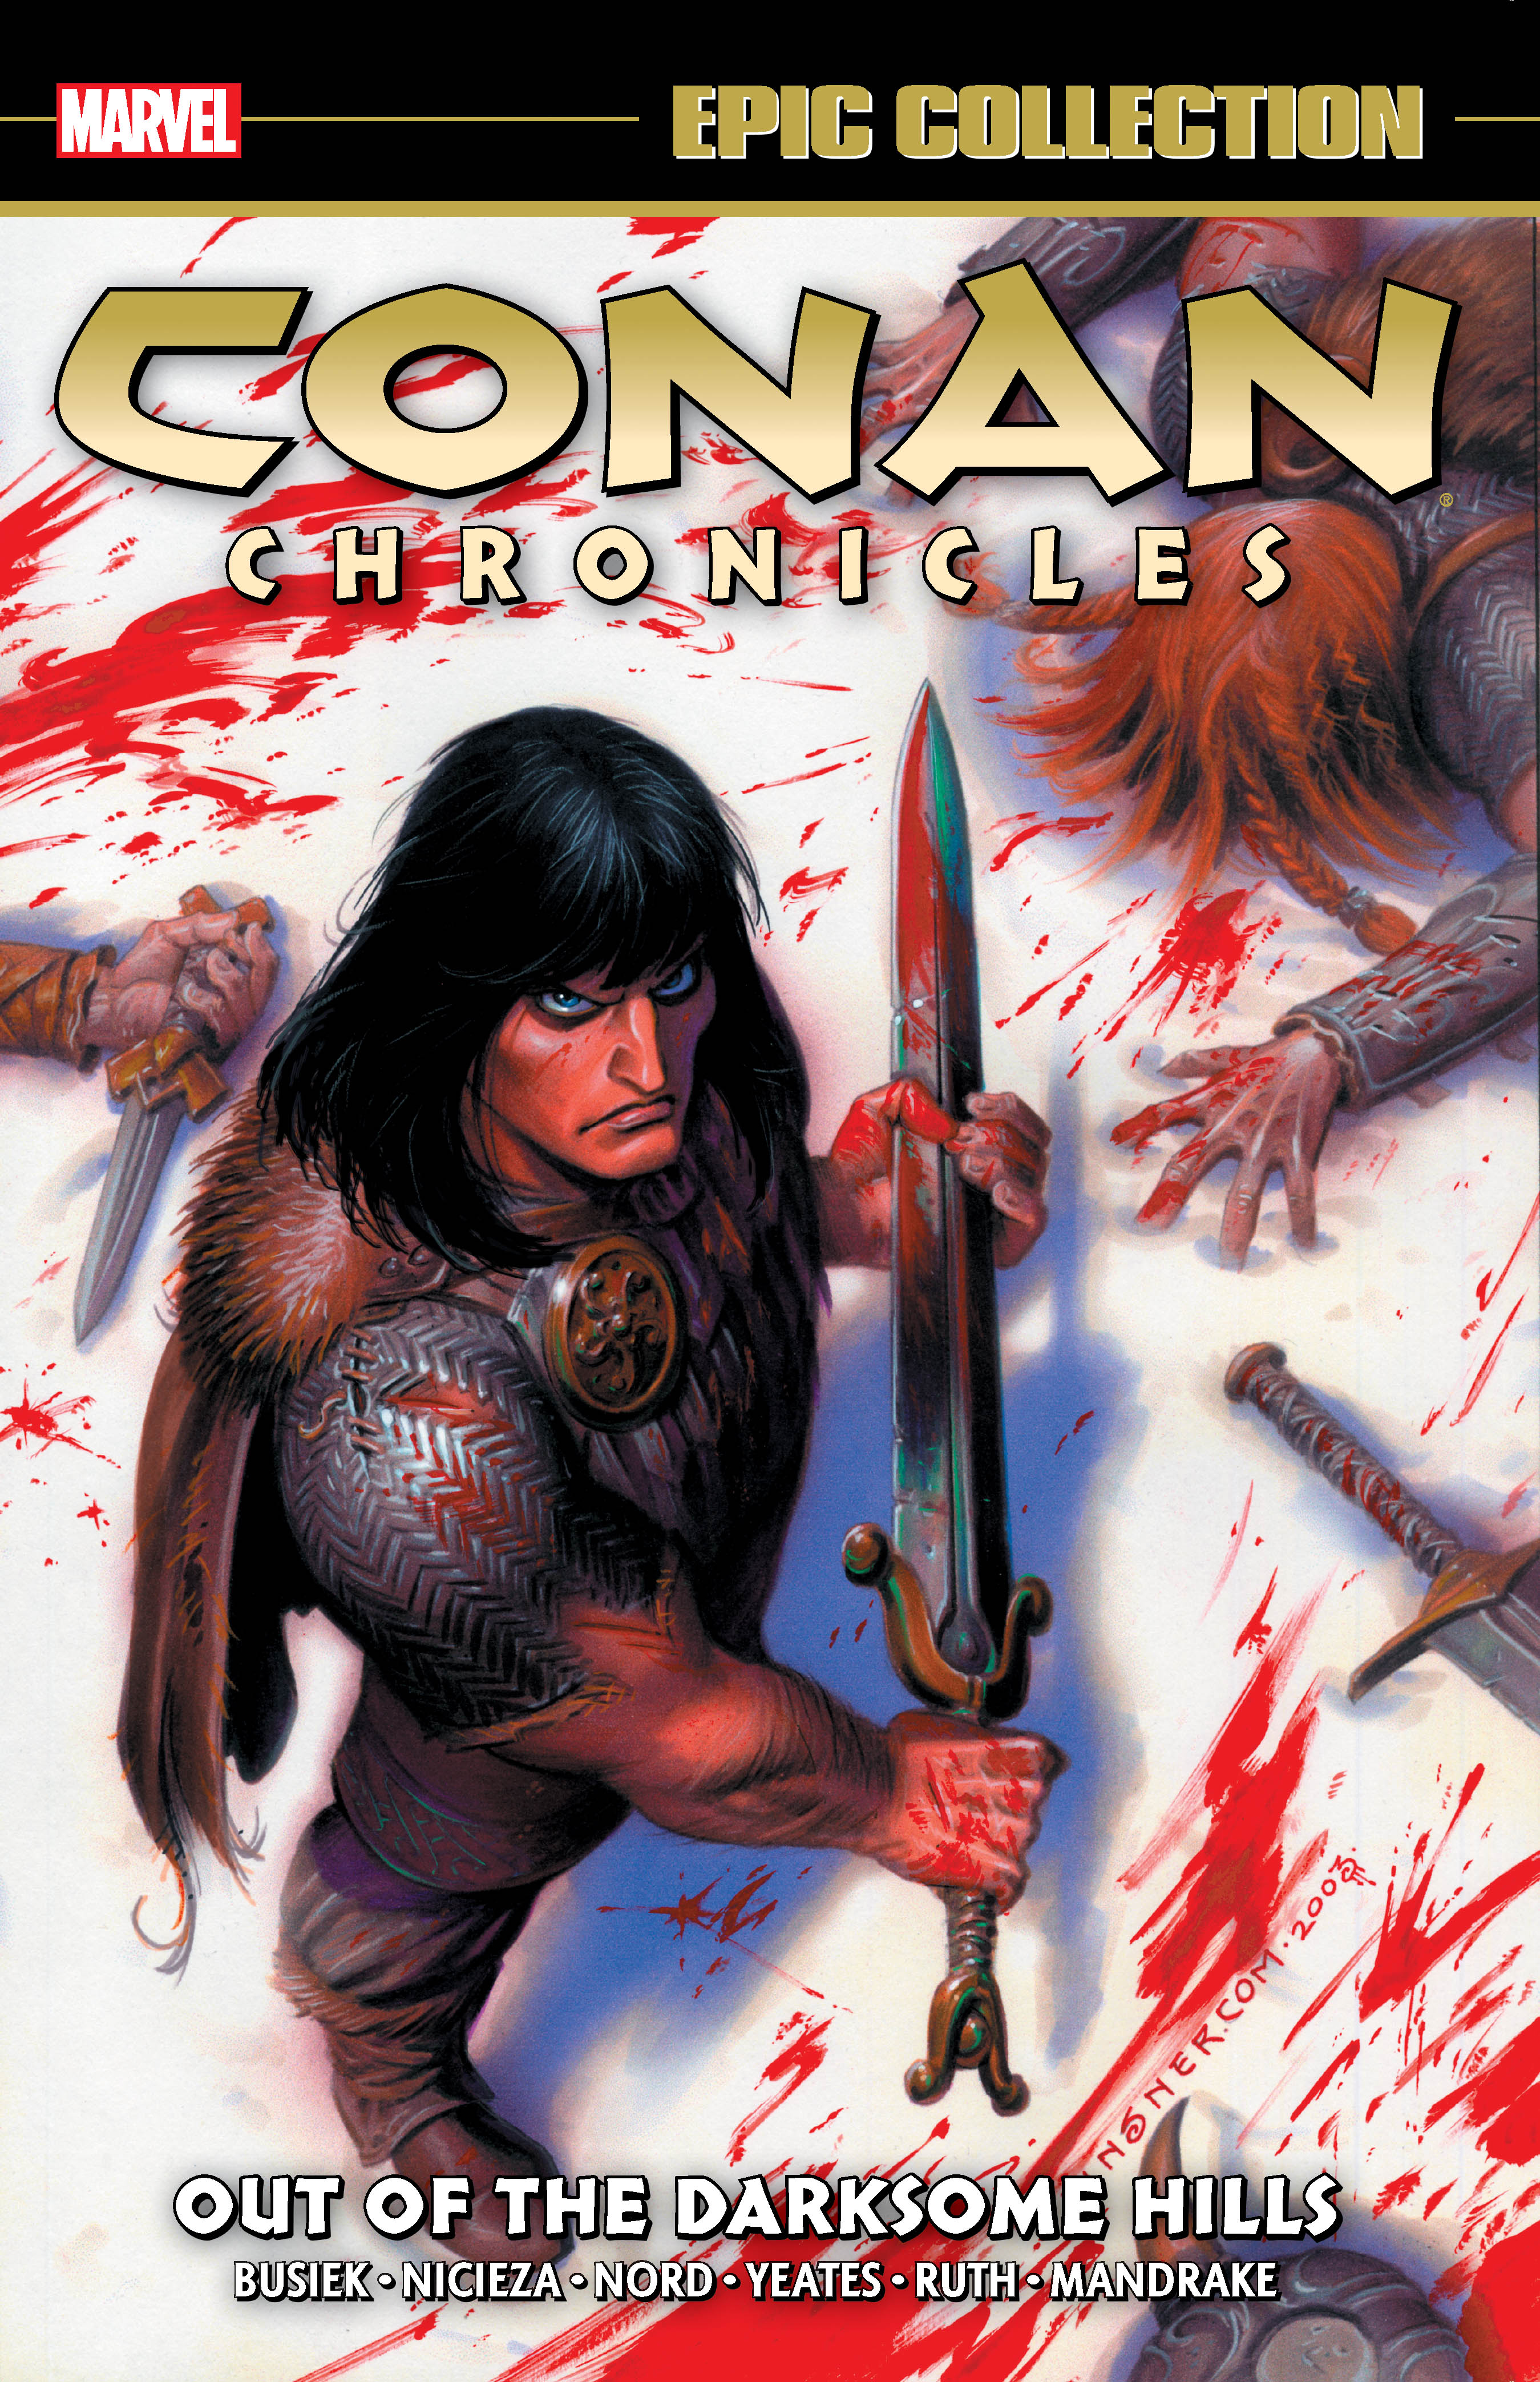 Chronicles of Conan, vol. 2, Rogues in the House (Dark Horse 2003) PB, J113